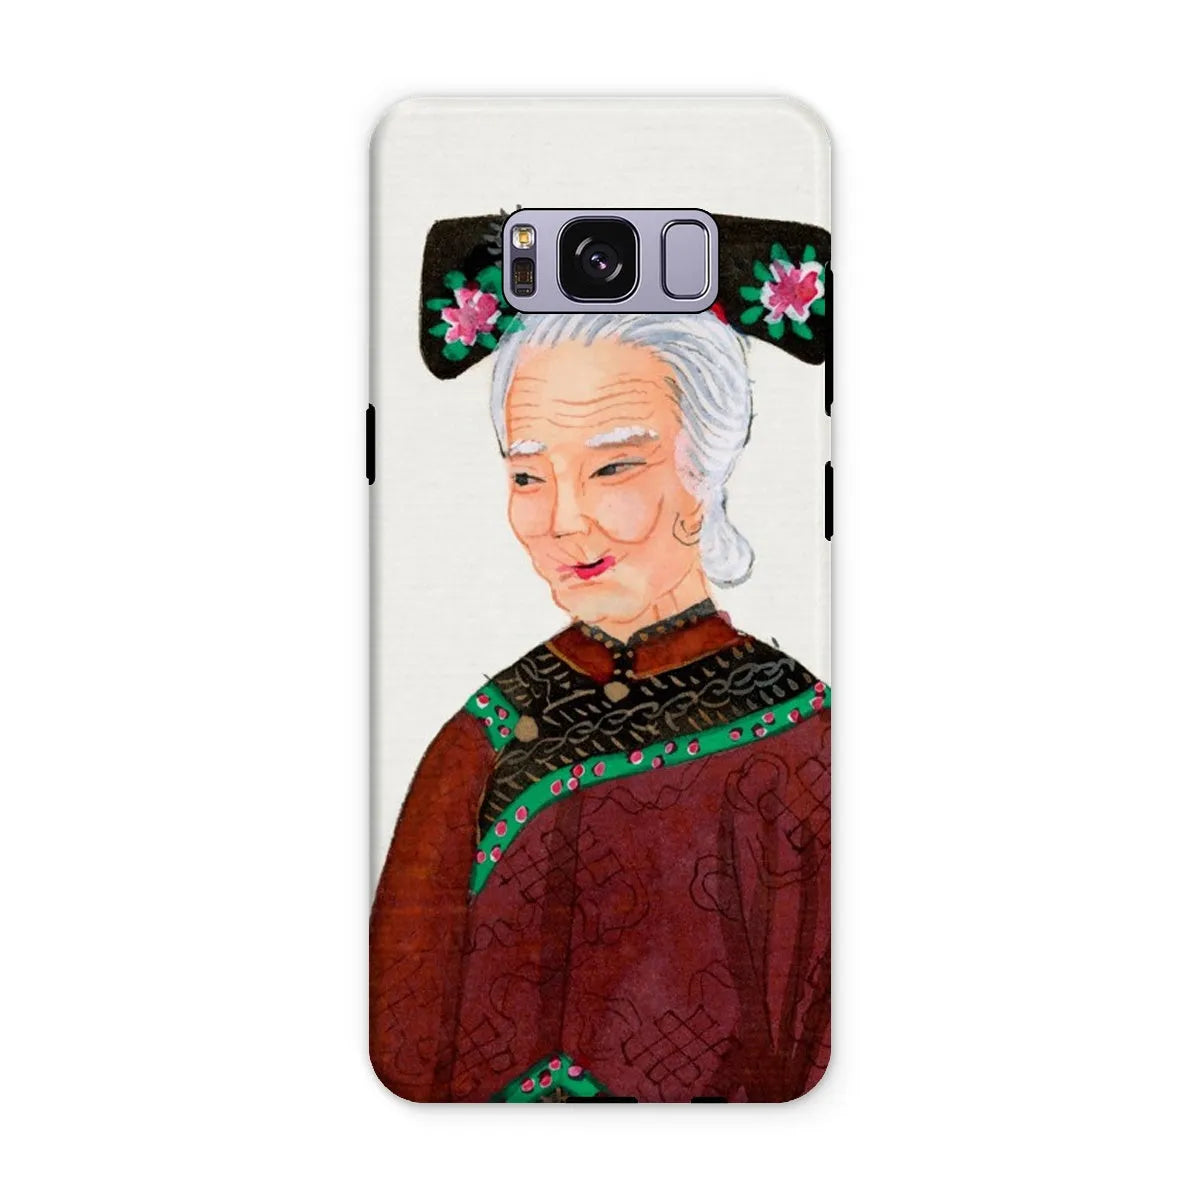 Grand Dame Too - Aesthetic Chinese Art Phone Case - Samsung Galaxy S8 Plus / Matte - Mobile Phone Cases - Aesthetic Art